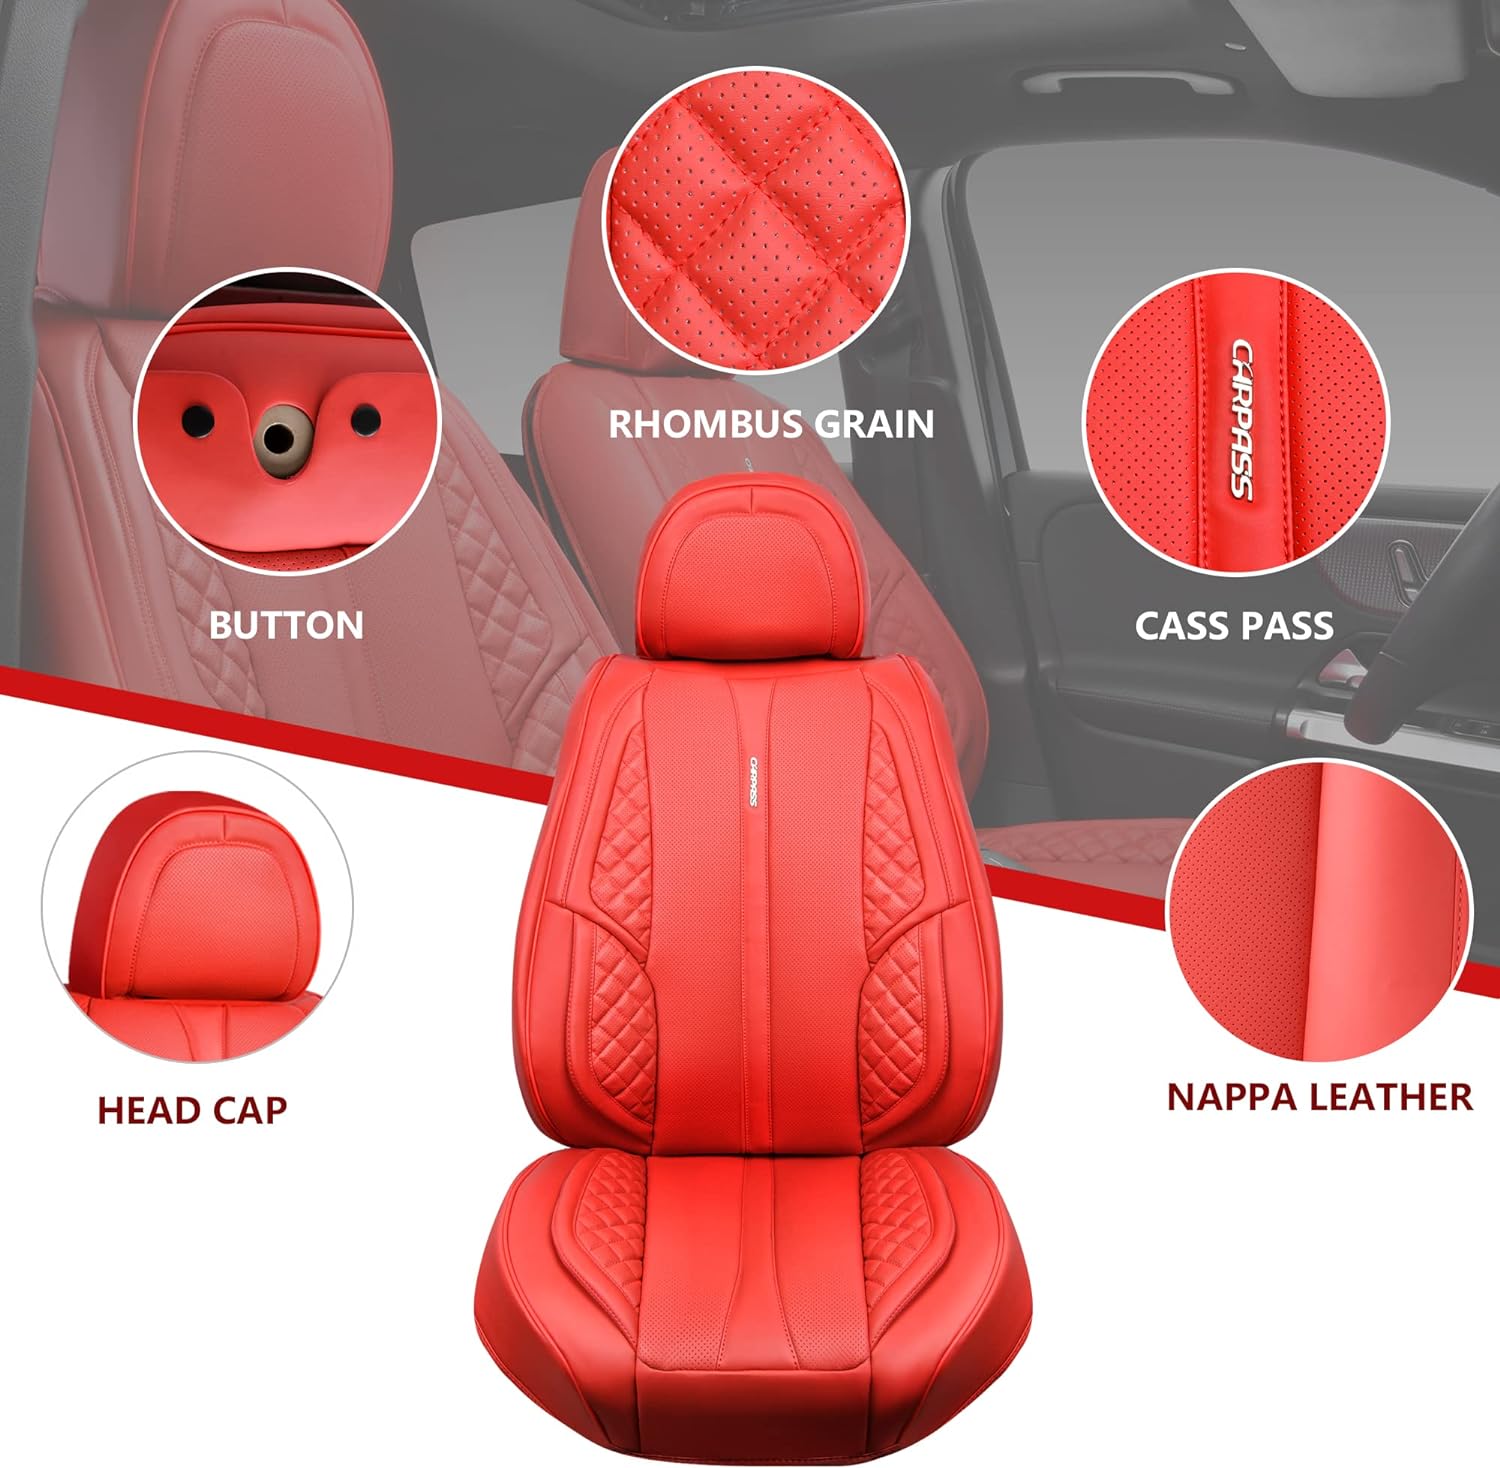 CAR PASS Nappa Leather Car Seat Covers Full Set Waterproof Protector Durable Cushioned,Universal Fit for Sedan SUV Pick-up Truck,Automotive, Anti-Slip and Backseat Luxury Premium Deluxe(Black)